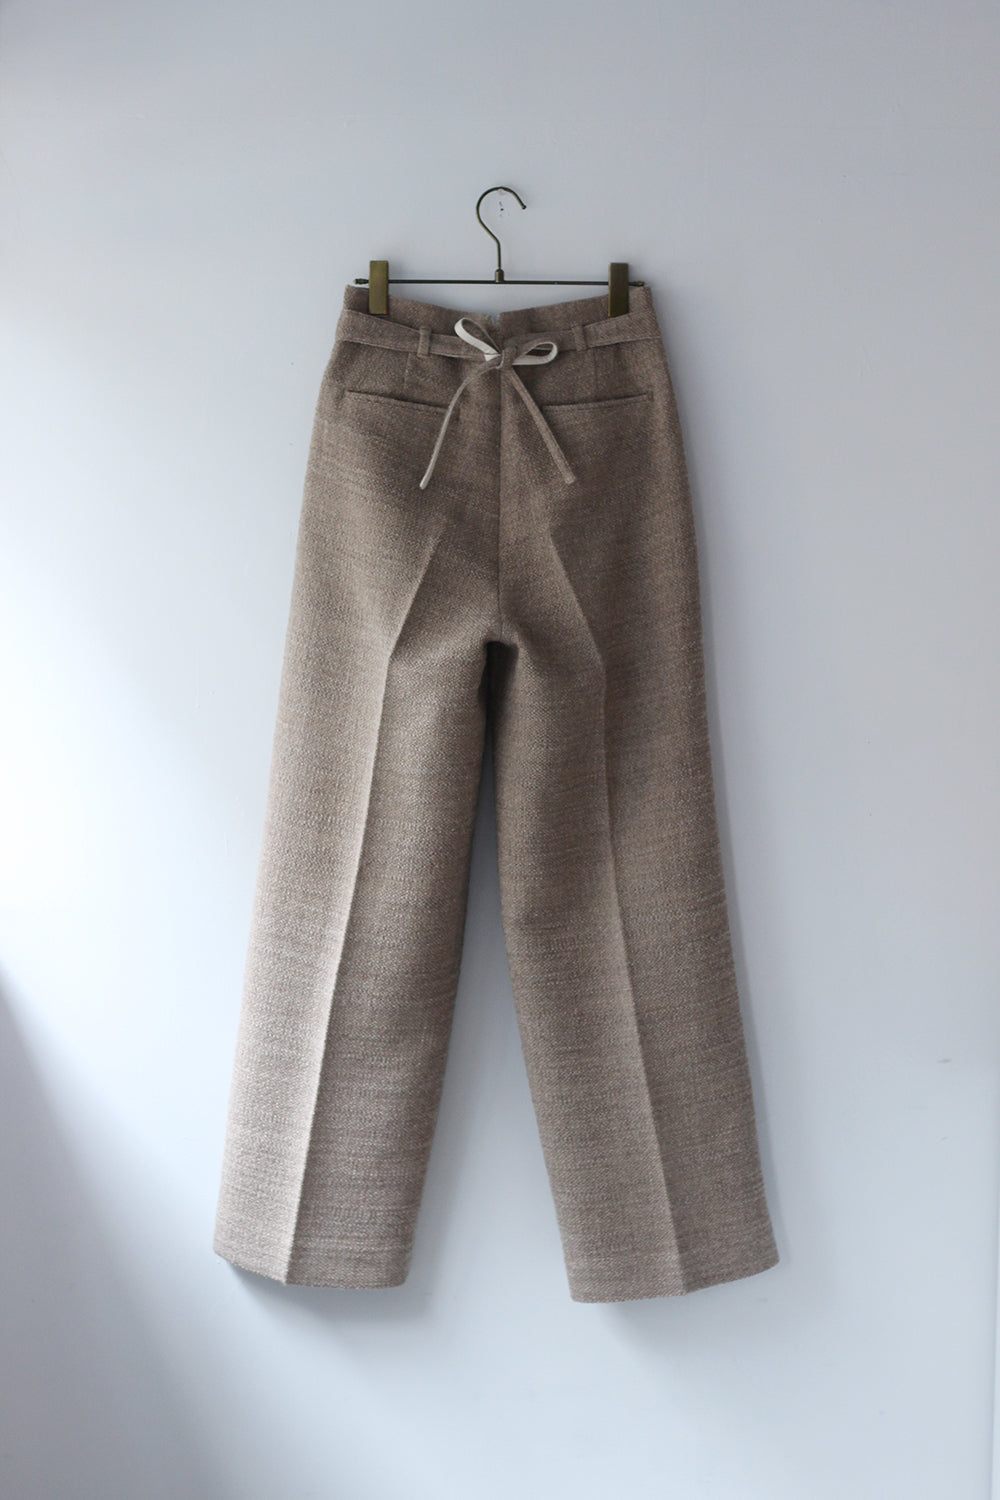 WRYHT "KNOTTED BACK PLEATED TROUSER" (dune)